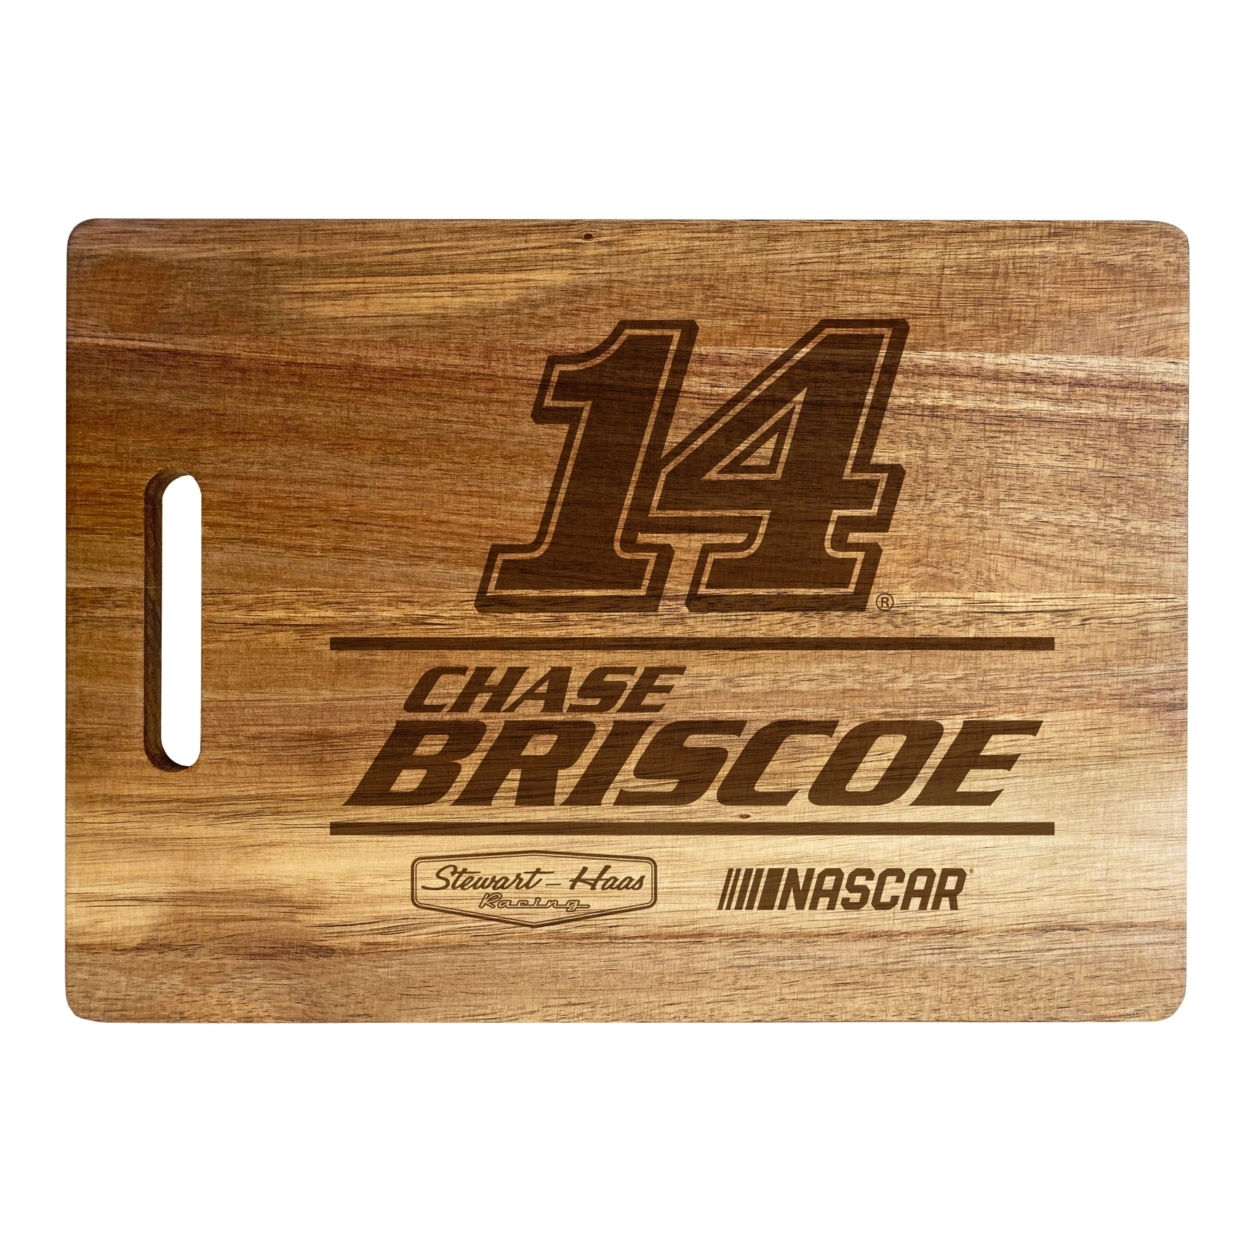 #14 Chase Briscoe NASCAR Officially Licensed Engraved Wooden Cutting Board